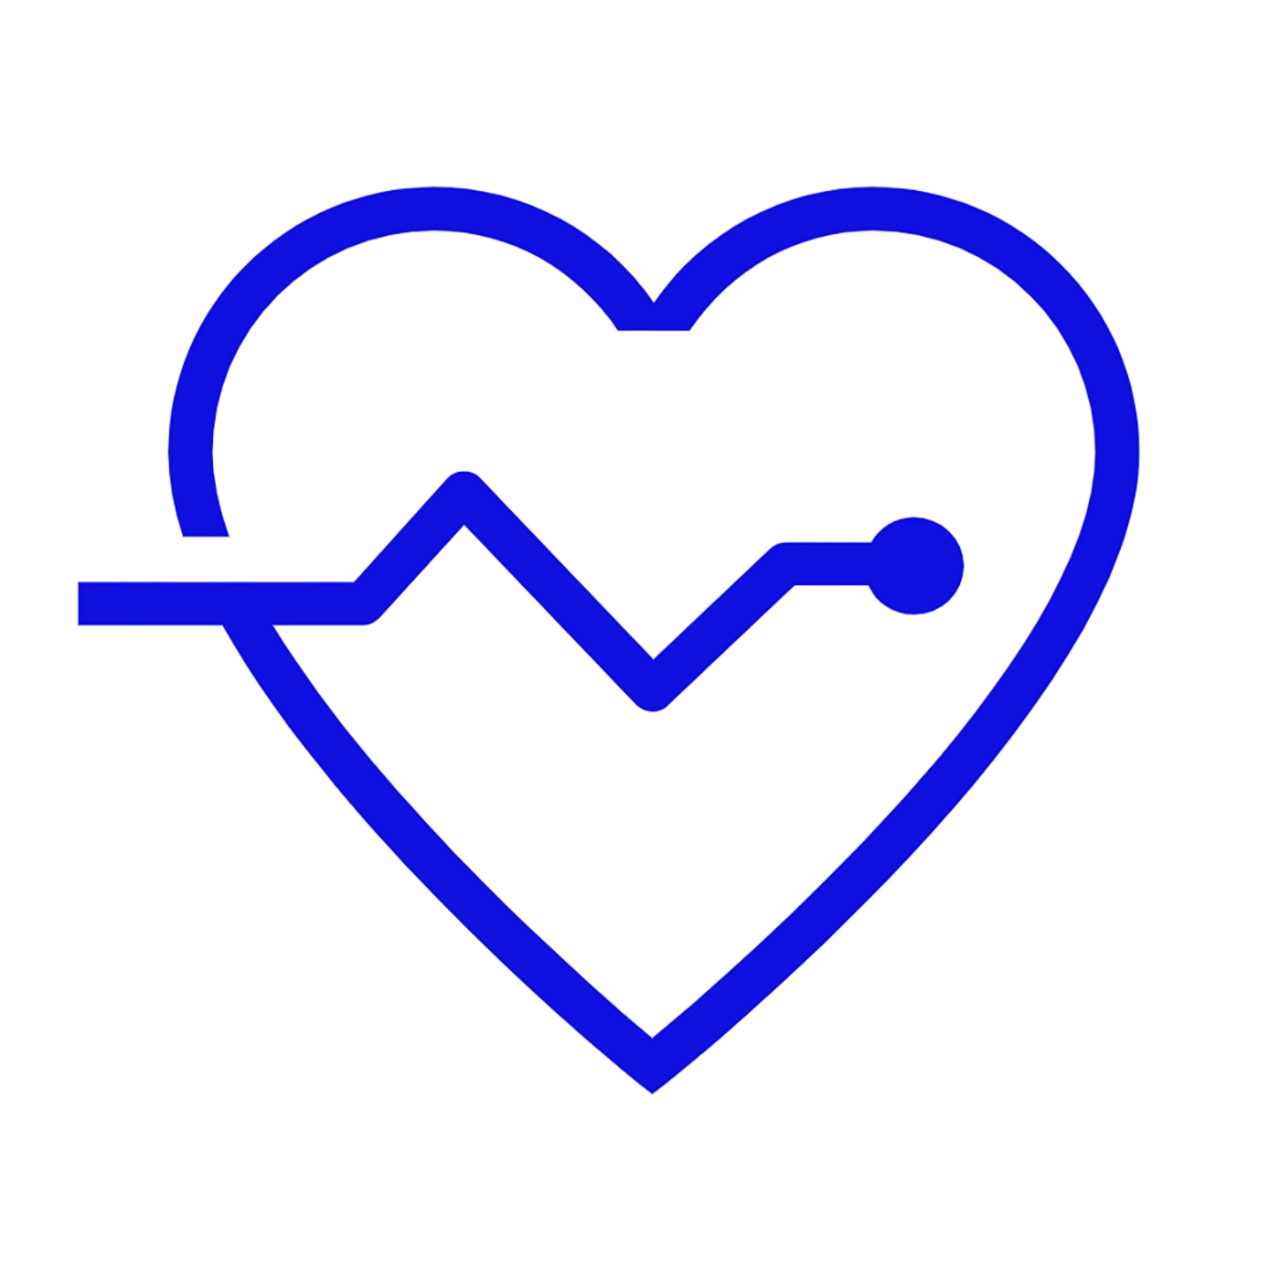 Simple heart illustration with EKG line icon